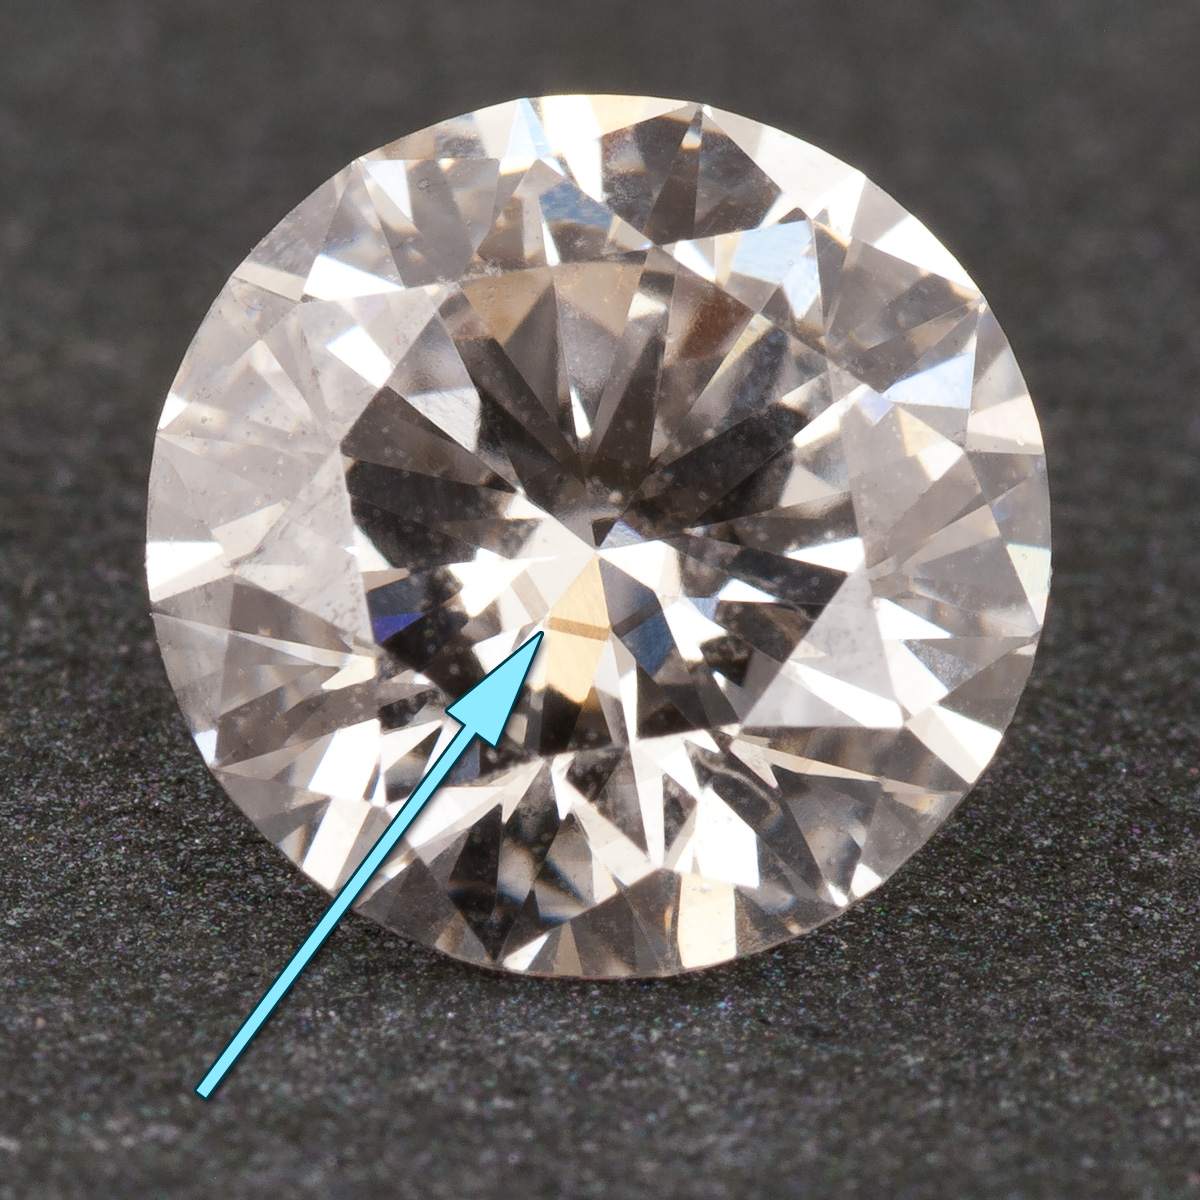 Why Are Synthetic Diamonds Called Eco-friendly Diamonds?